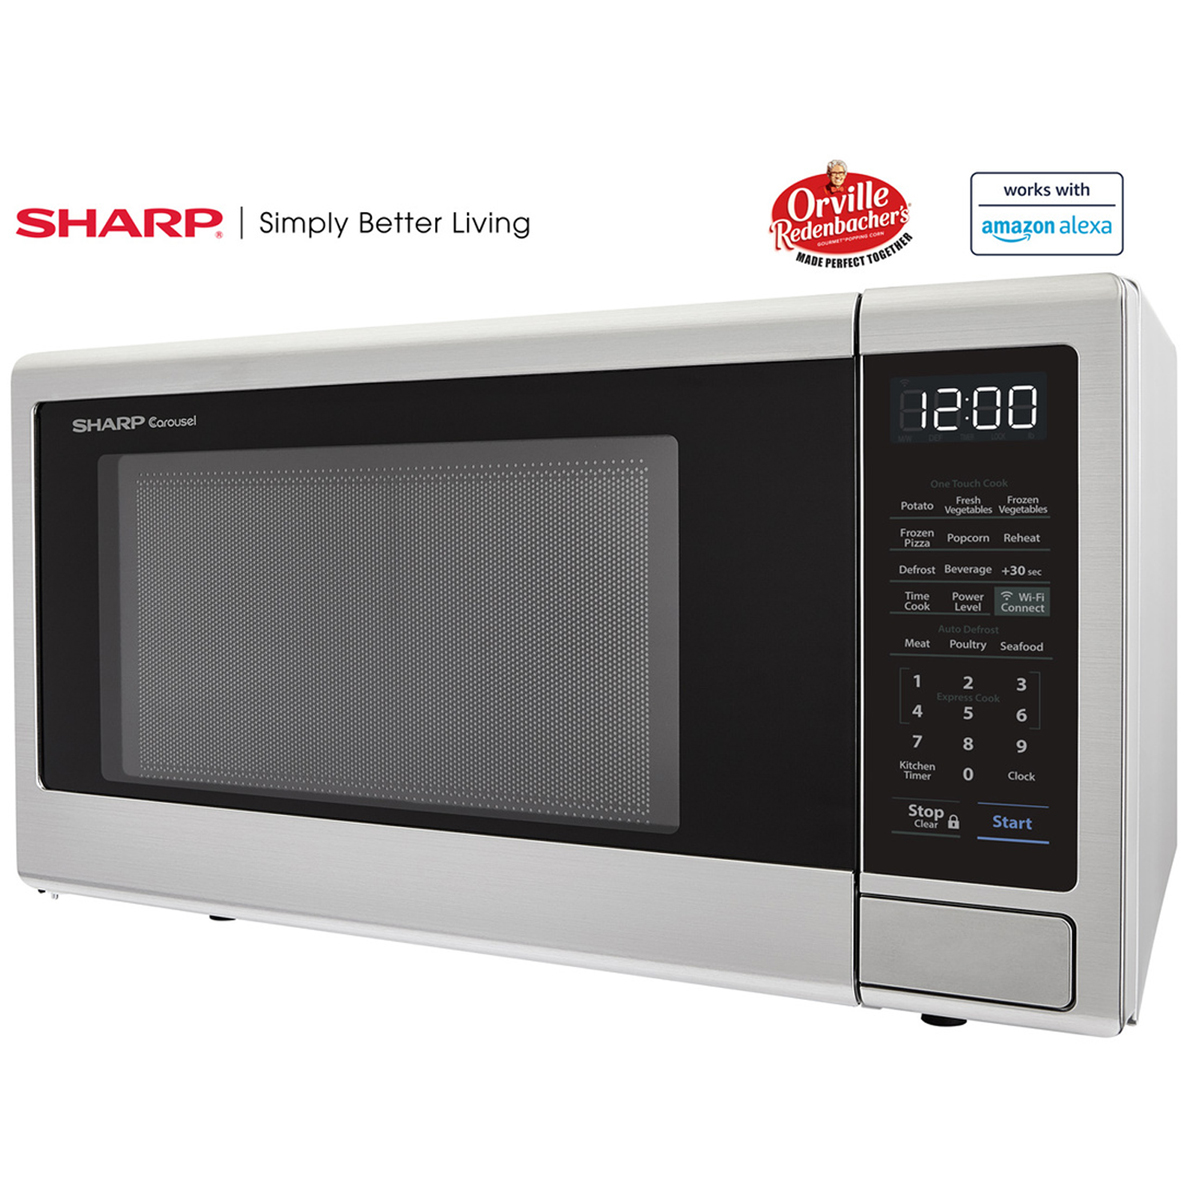 1.1 cu. ft. 1000W Sharp Stainless Steel Smart Carousel Countertop Microwave Oven (SMC1139FS) - image 2 of 10